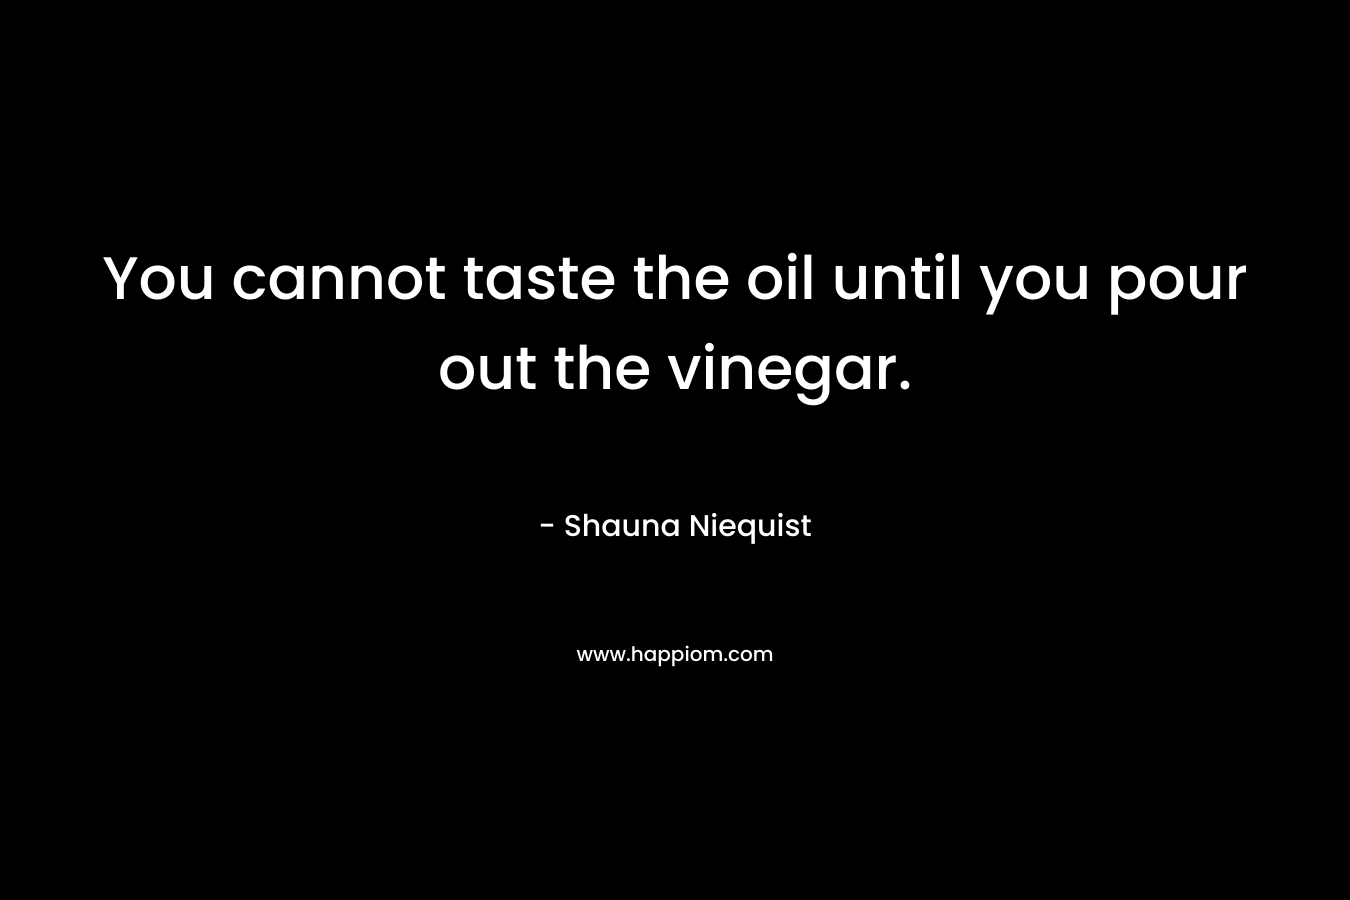 You cannot taste the oil until you pour out the vinegar. – Shauna Niequist